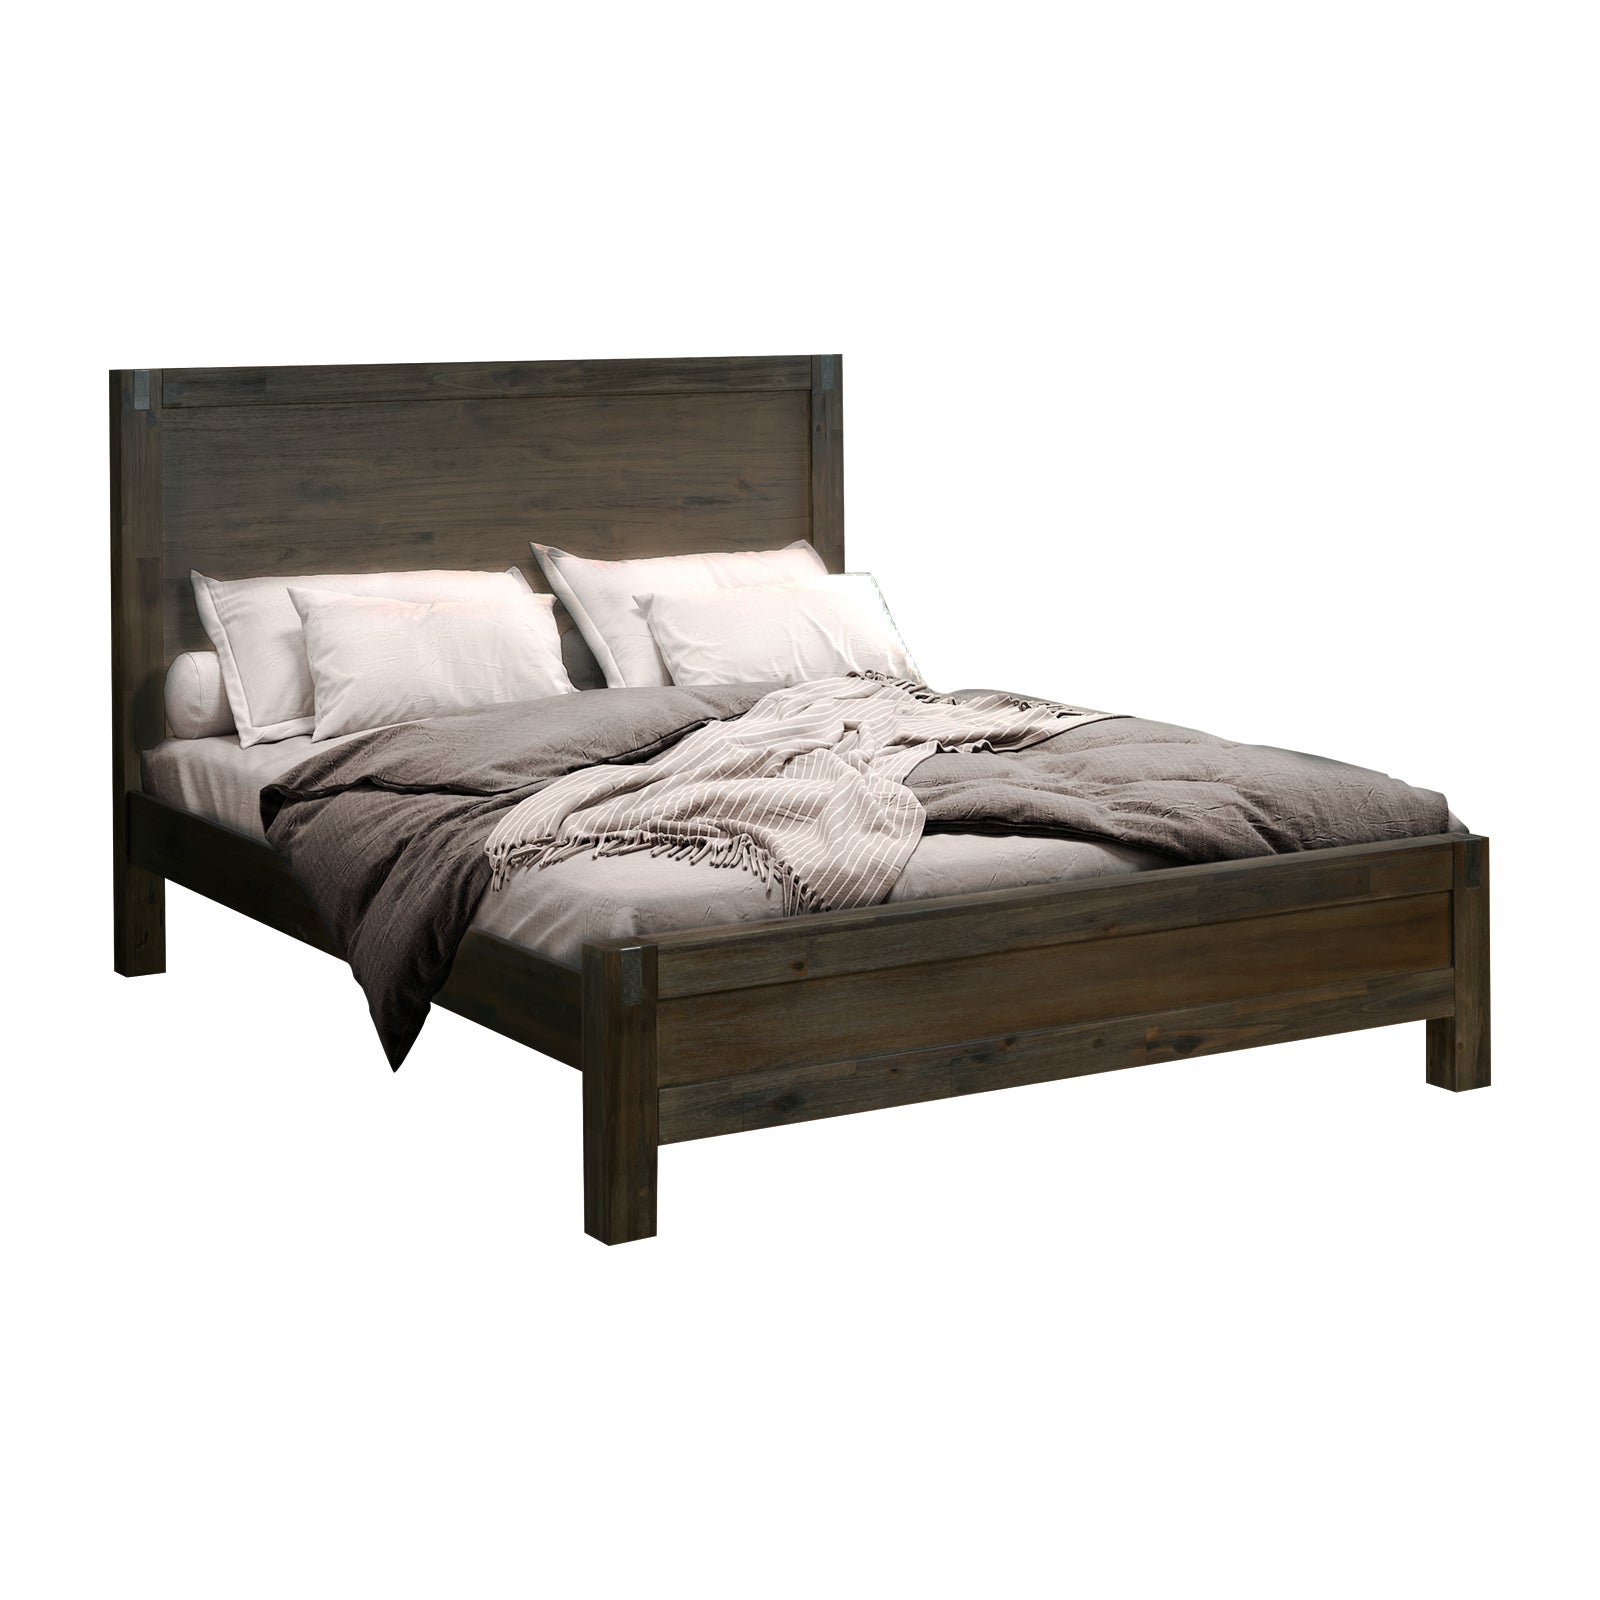 Bed Frame Double Size in Solid Wood Veneered Acacia Bedroom Timber Slat in Chocolate - SILBERSHELL